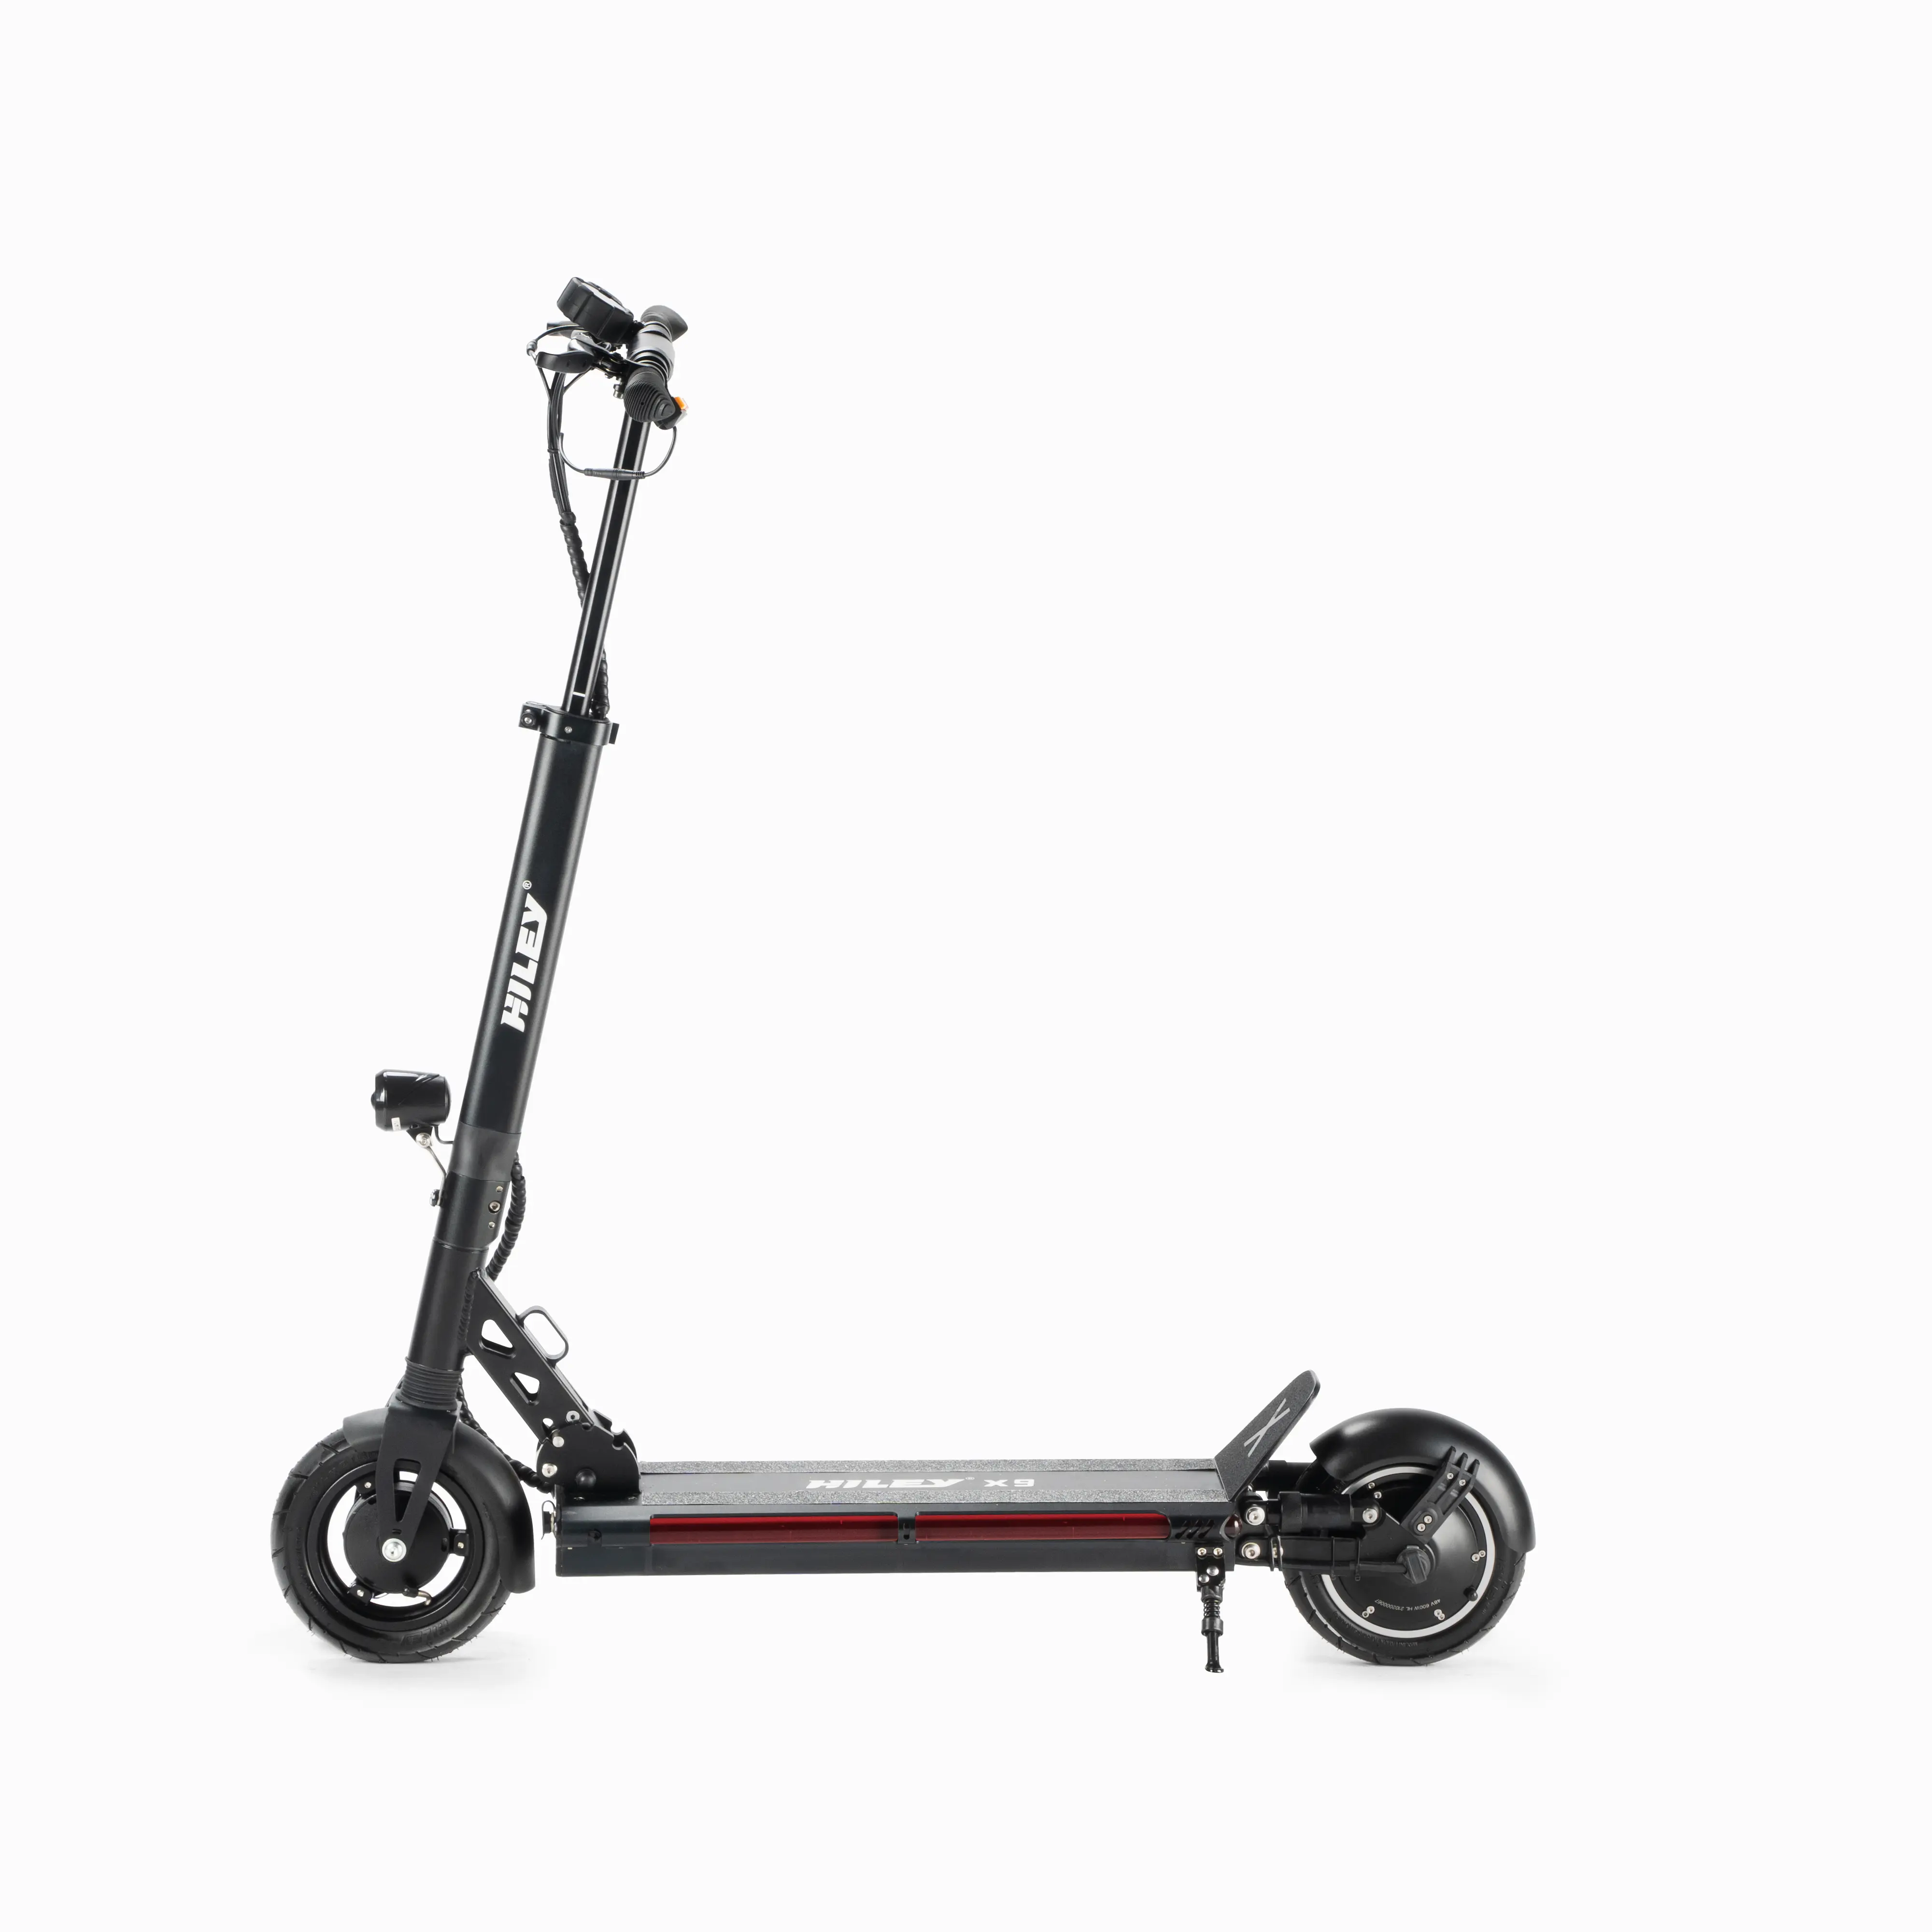 48V 600W detachable lithium battery electric scooter sharing electric scooter USA